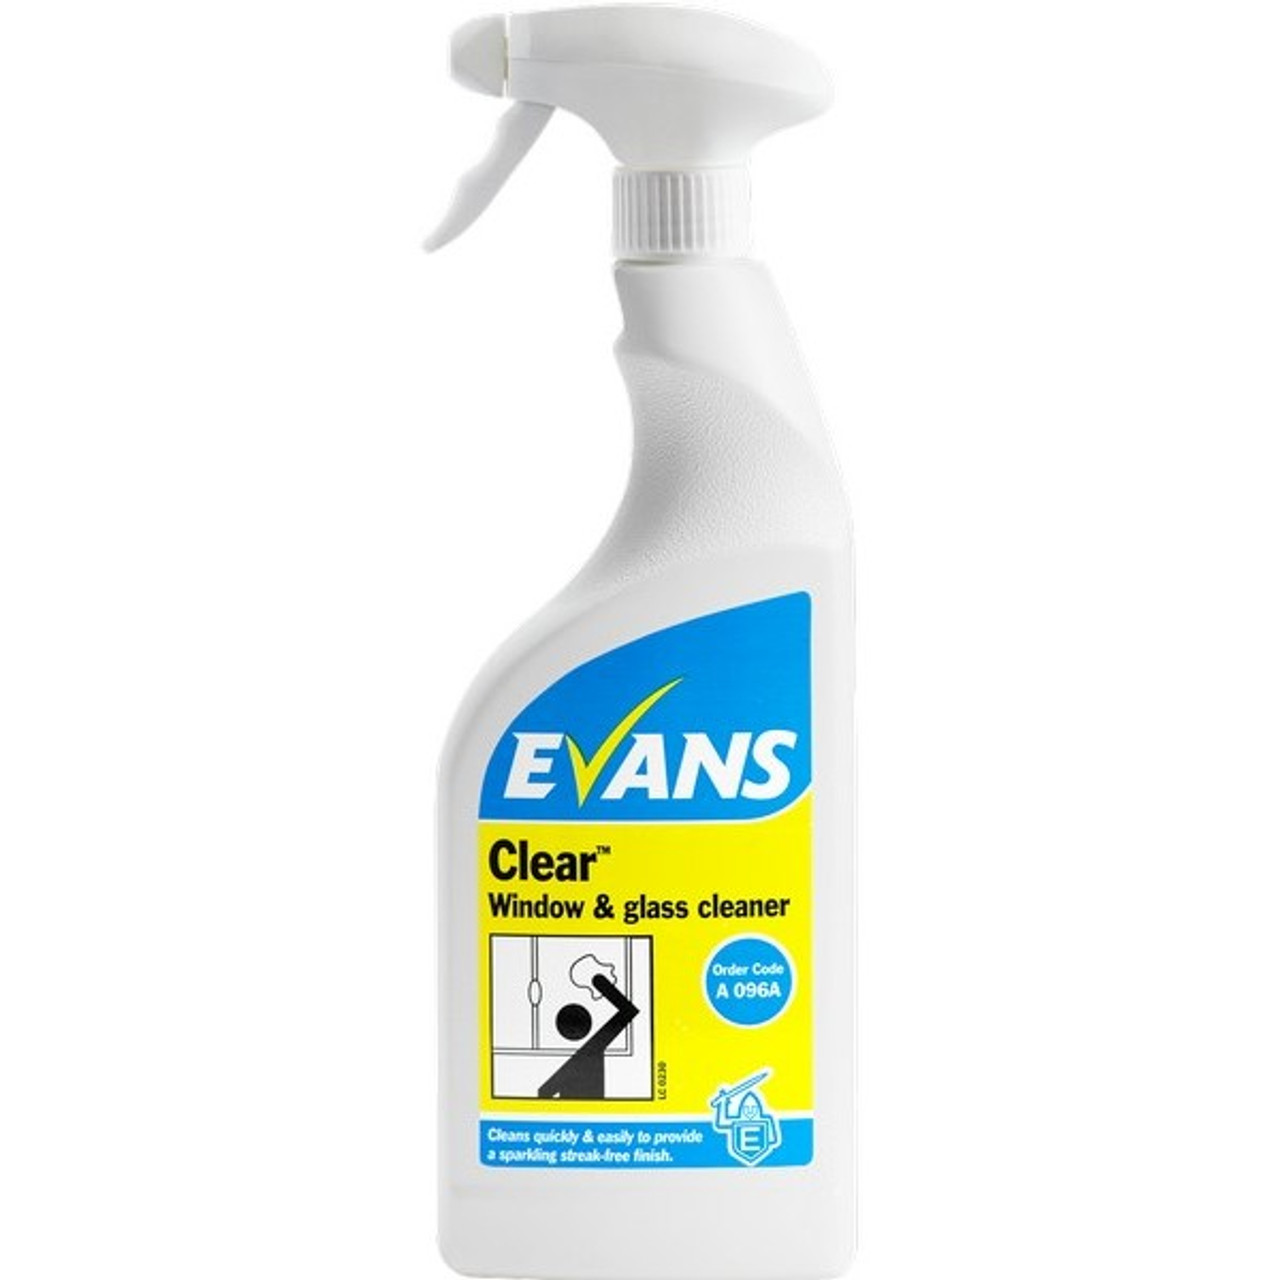 EVANS CLEAR WINDOW & GLASS CLEANER 750ml